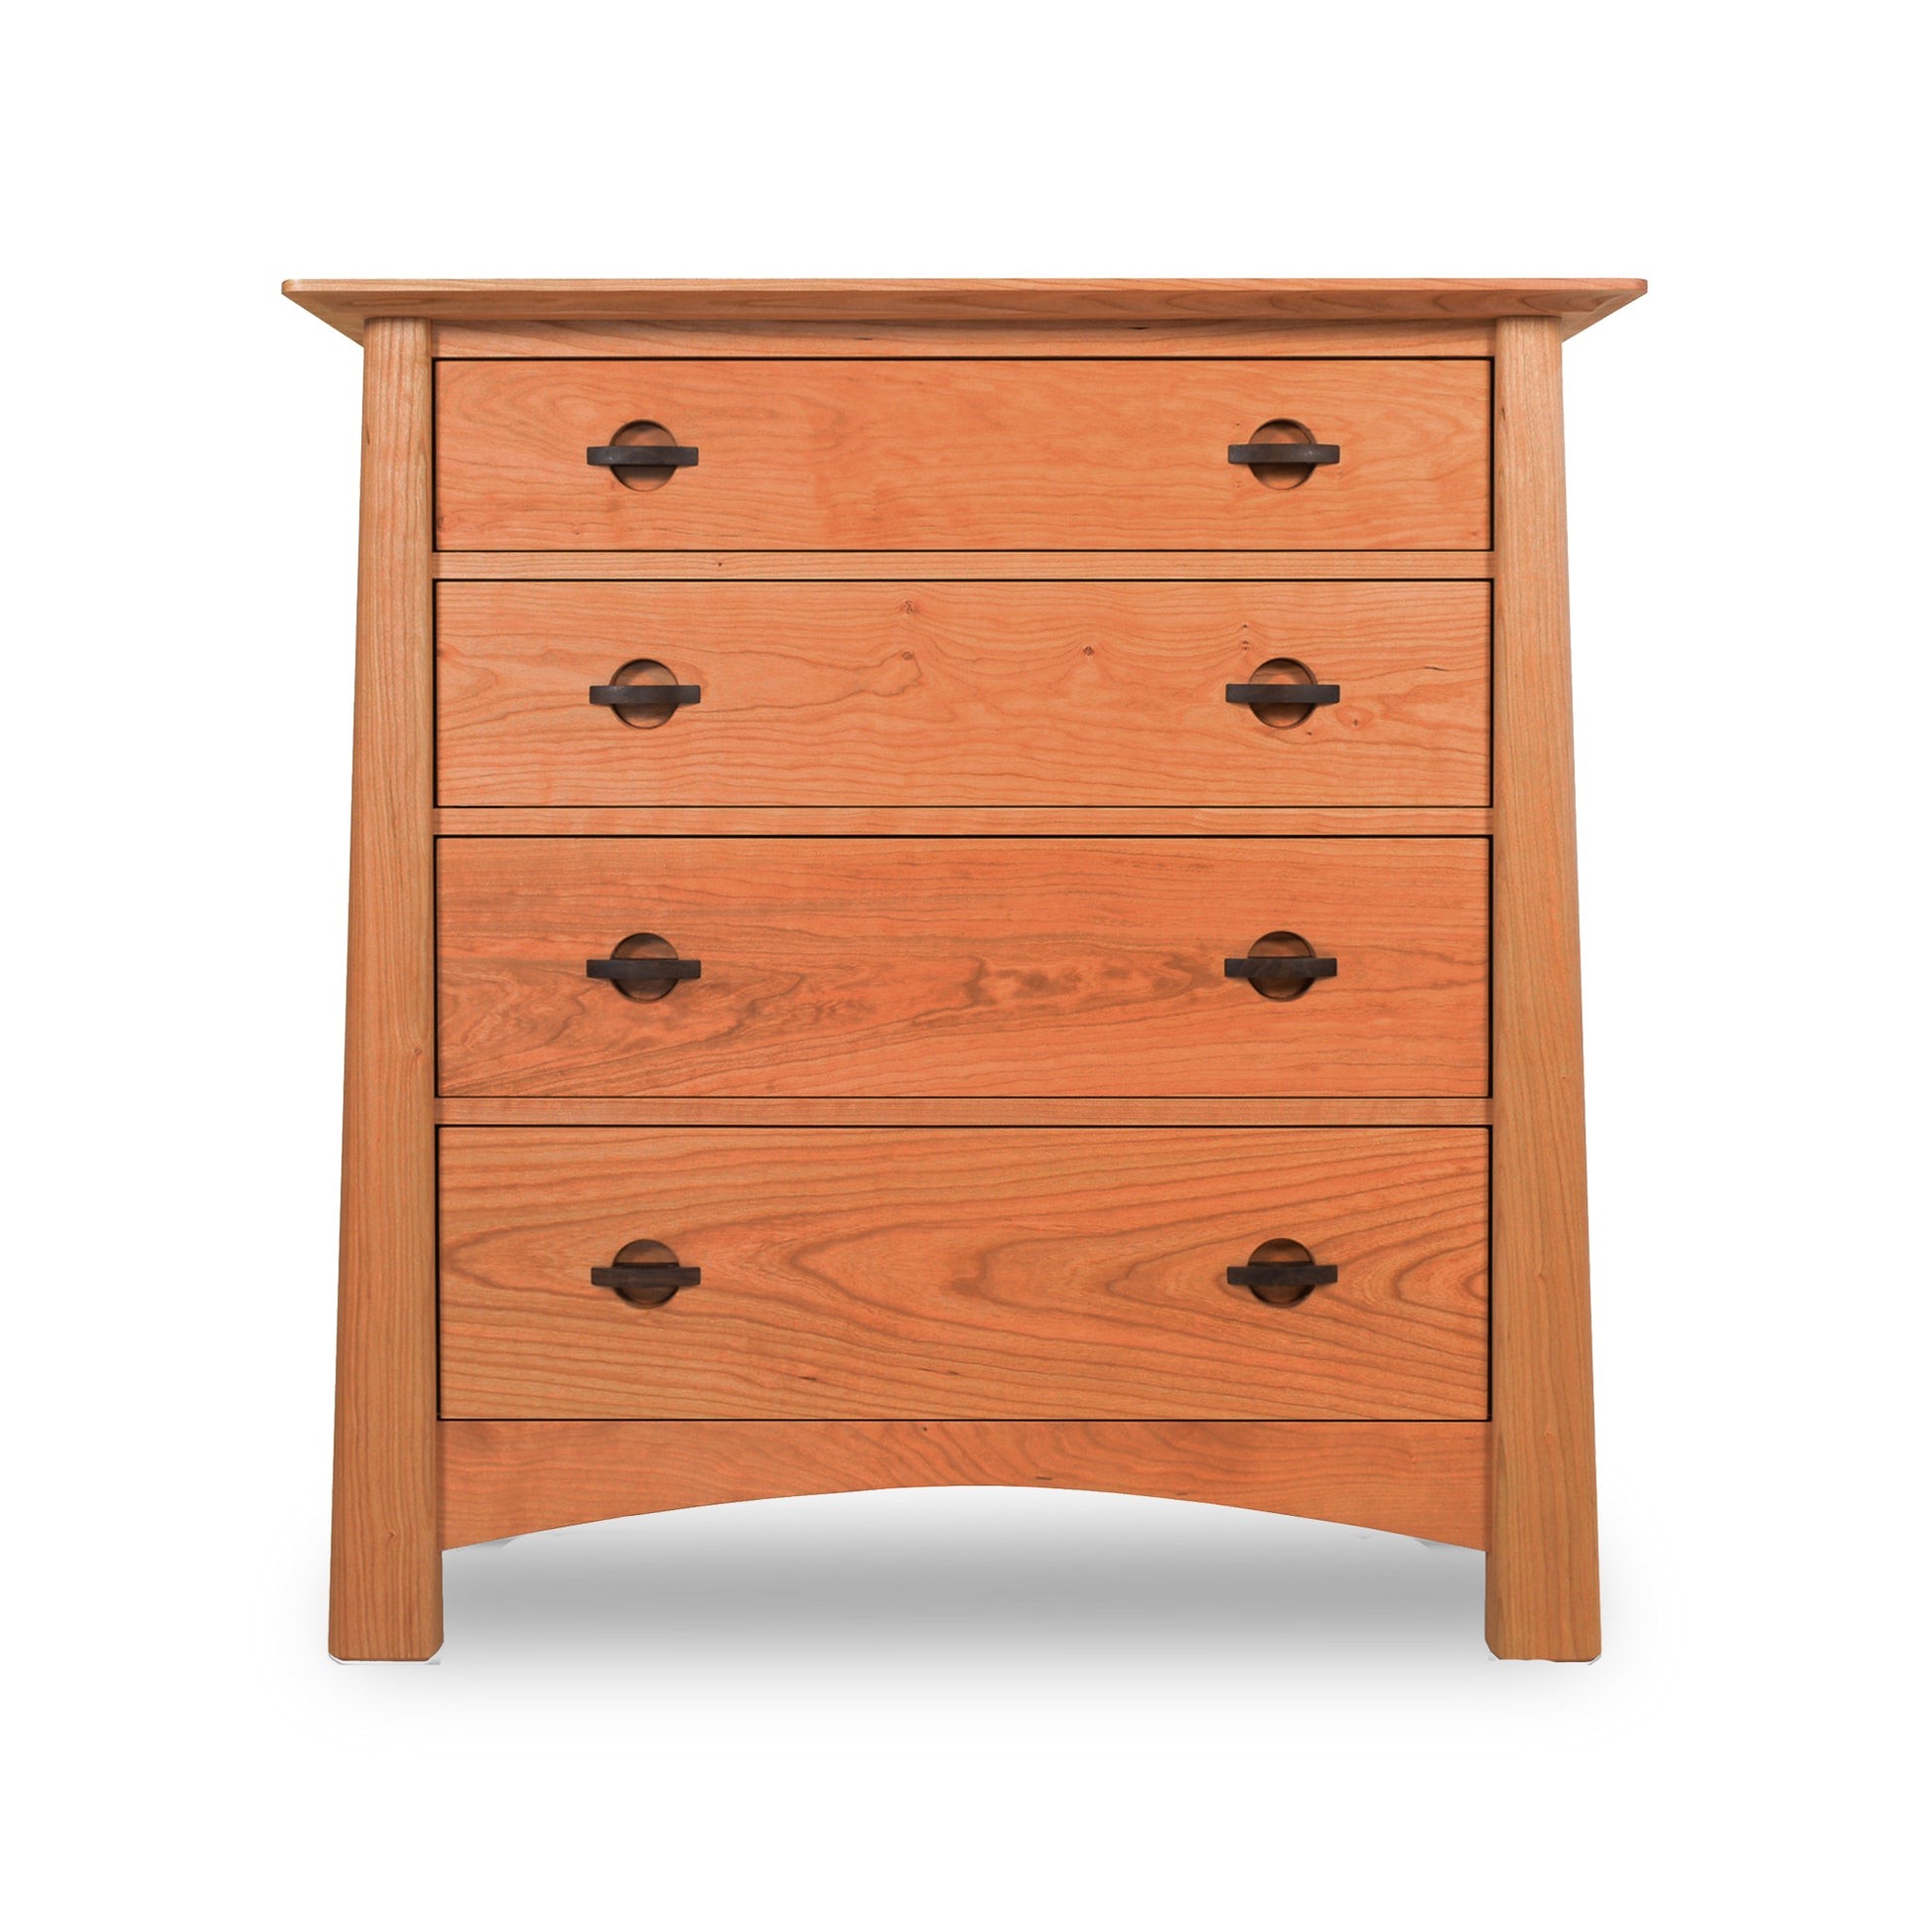 A Maple Corner Woodworks Cherry Moon 4-Drawer Chest with contemporary Asian features on a white background.